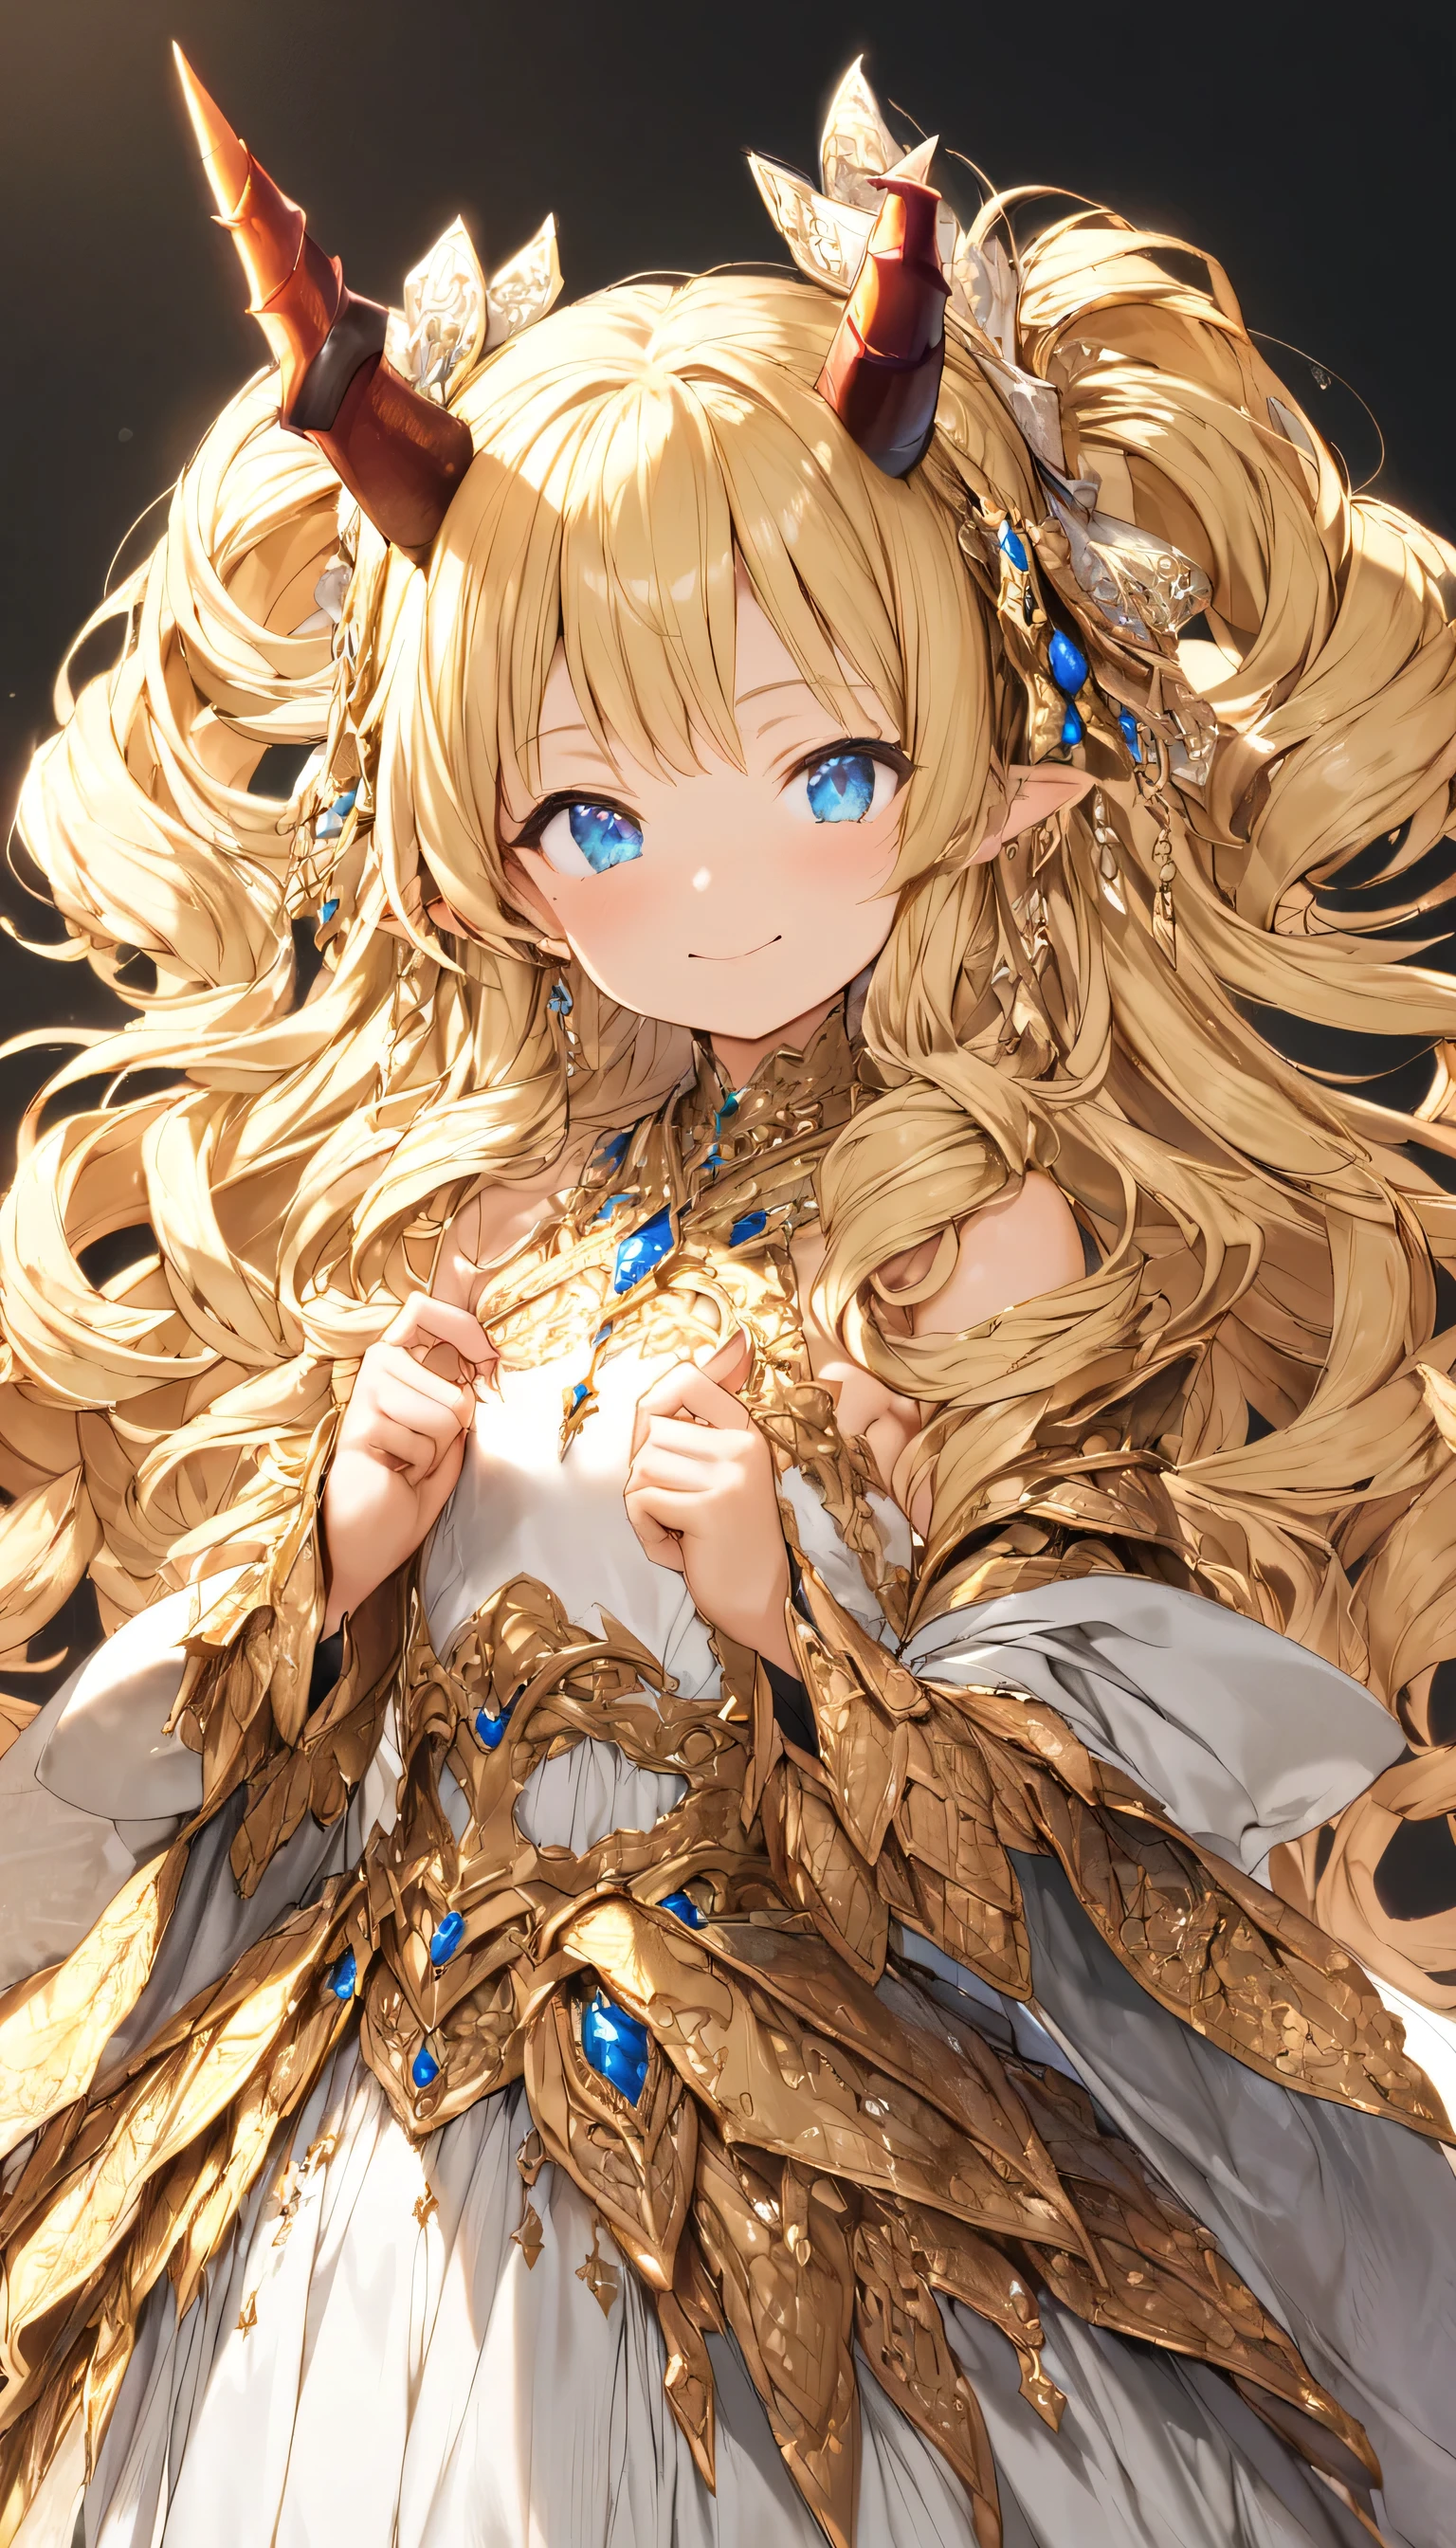 masterpiece、Best Quality、Very detailed、High resolution、Japanese anime、1girl、Blonde Hair、（Medium length hair：1.4）、Side braid hair、Curly Hair、Wavy Hair、Drill Hair、Curly Outward Hair、Dragon Horn、（blue eyes：1.5）、（Beautiful detailed eyes：1.4）、Laughter、12 years old、3 heads、original character、Fantasy、（Black Background：1.2）、whole body、Beautiful fingers、Are standing、（Gold Lace Frill Armor Dress：1.5）、（Jeweled Headgear：1.5）、Photographed from the front、View your viewers